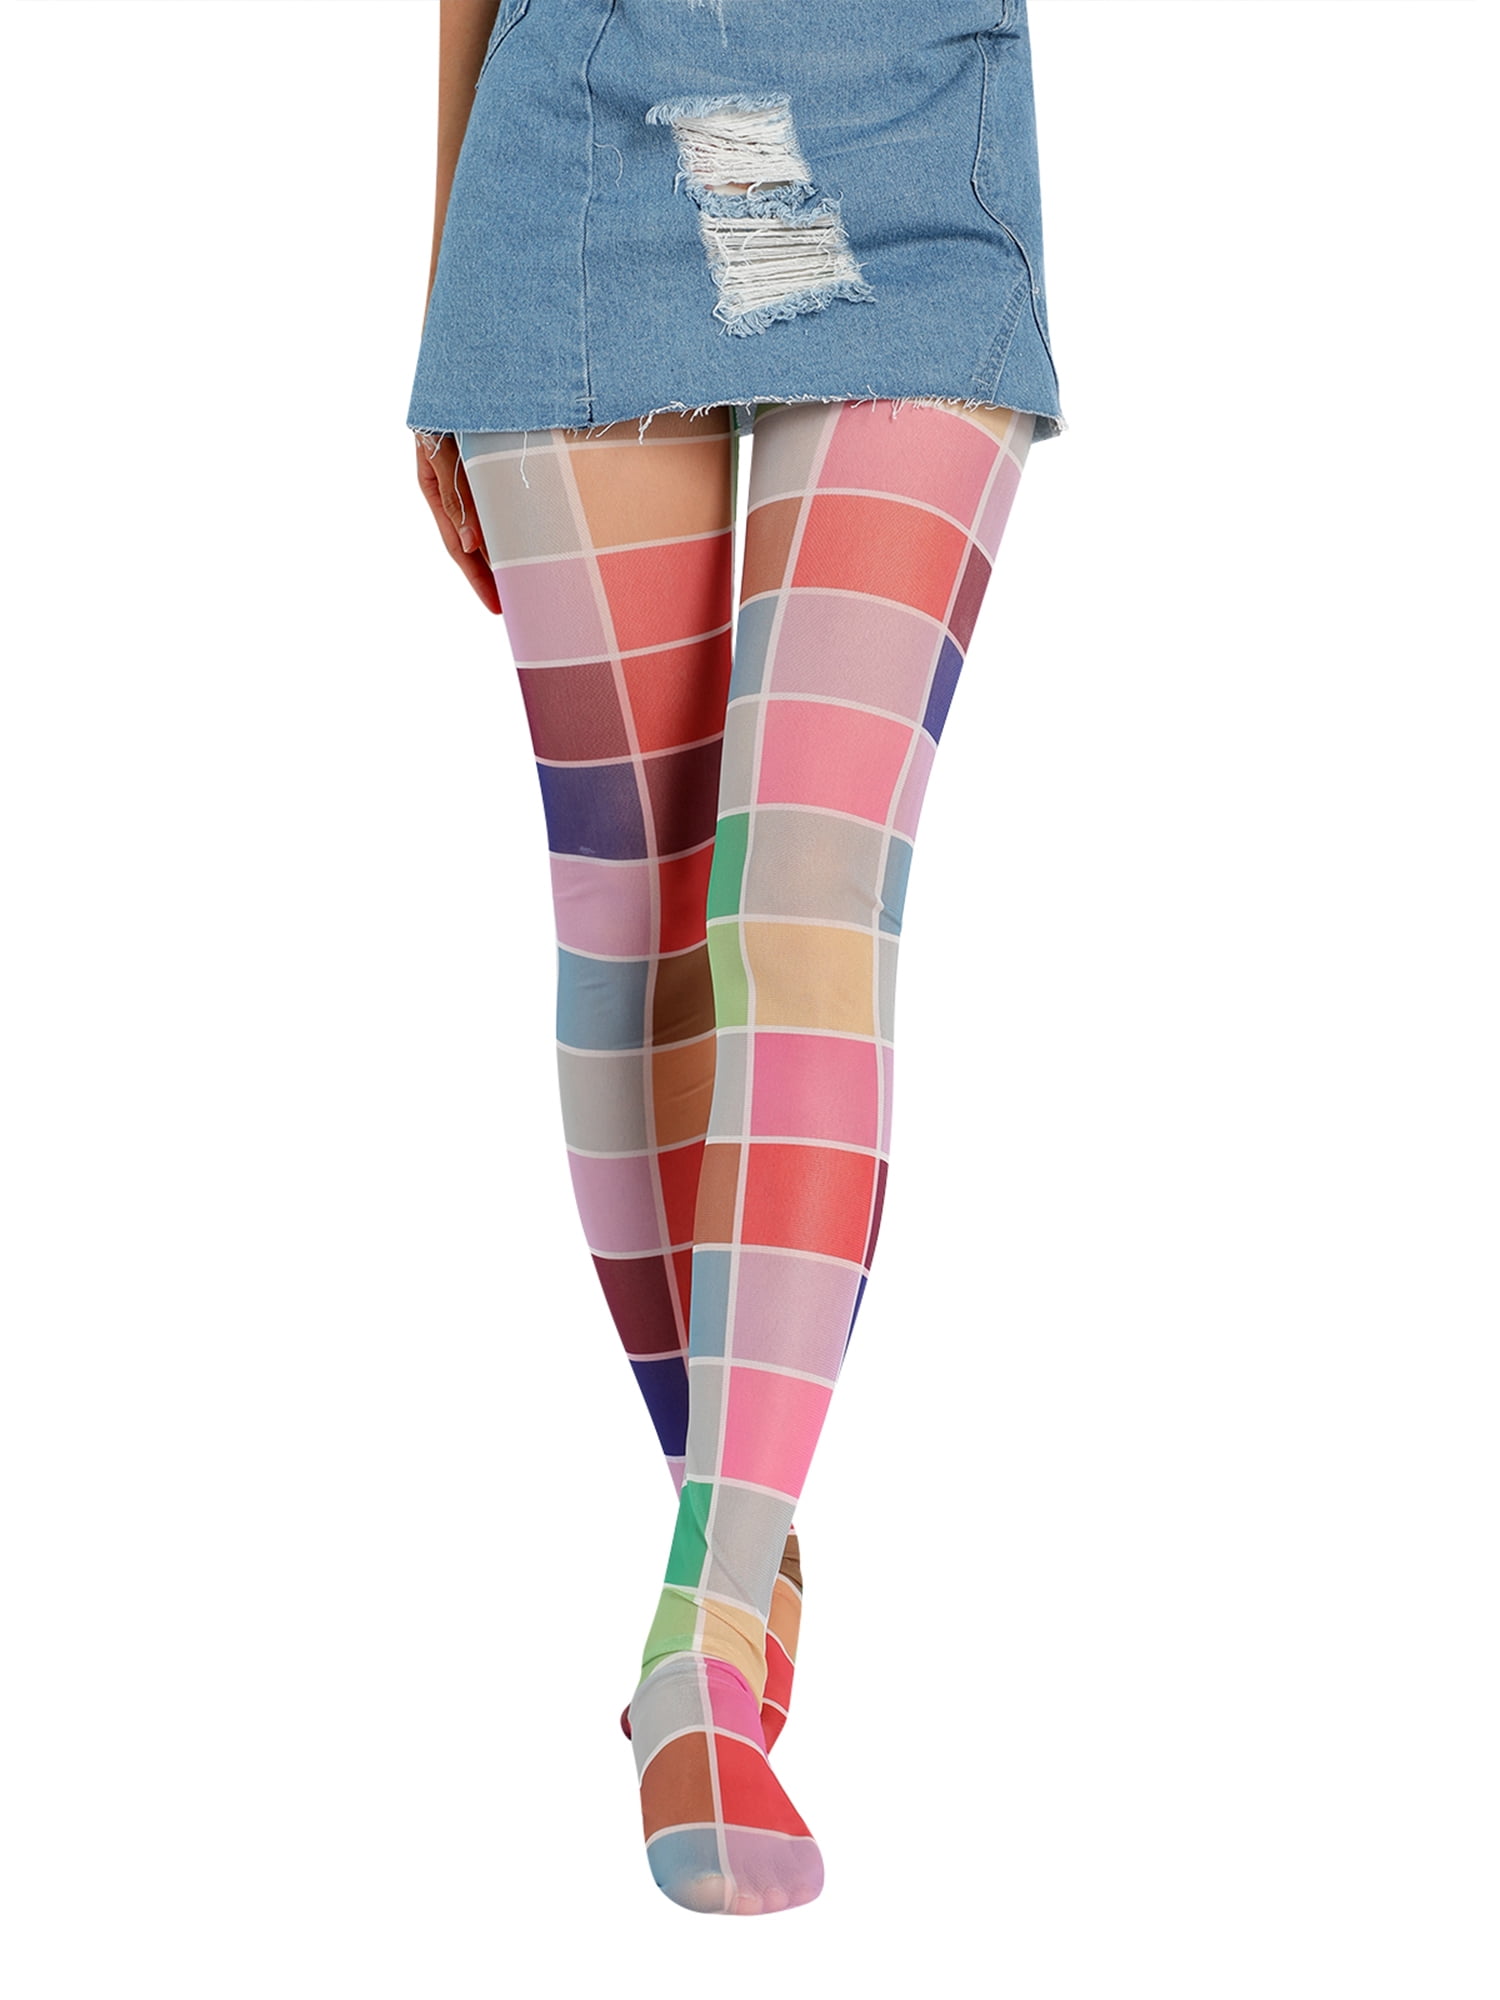 BeQeuewll Ladies Colorful Tights Women Soft Pantyhose Stretch Render Pants  High Stockings